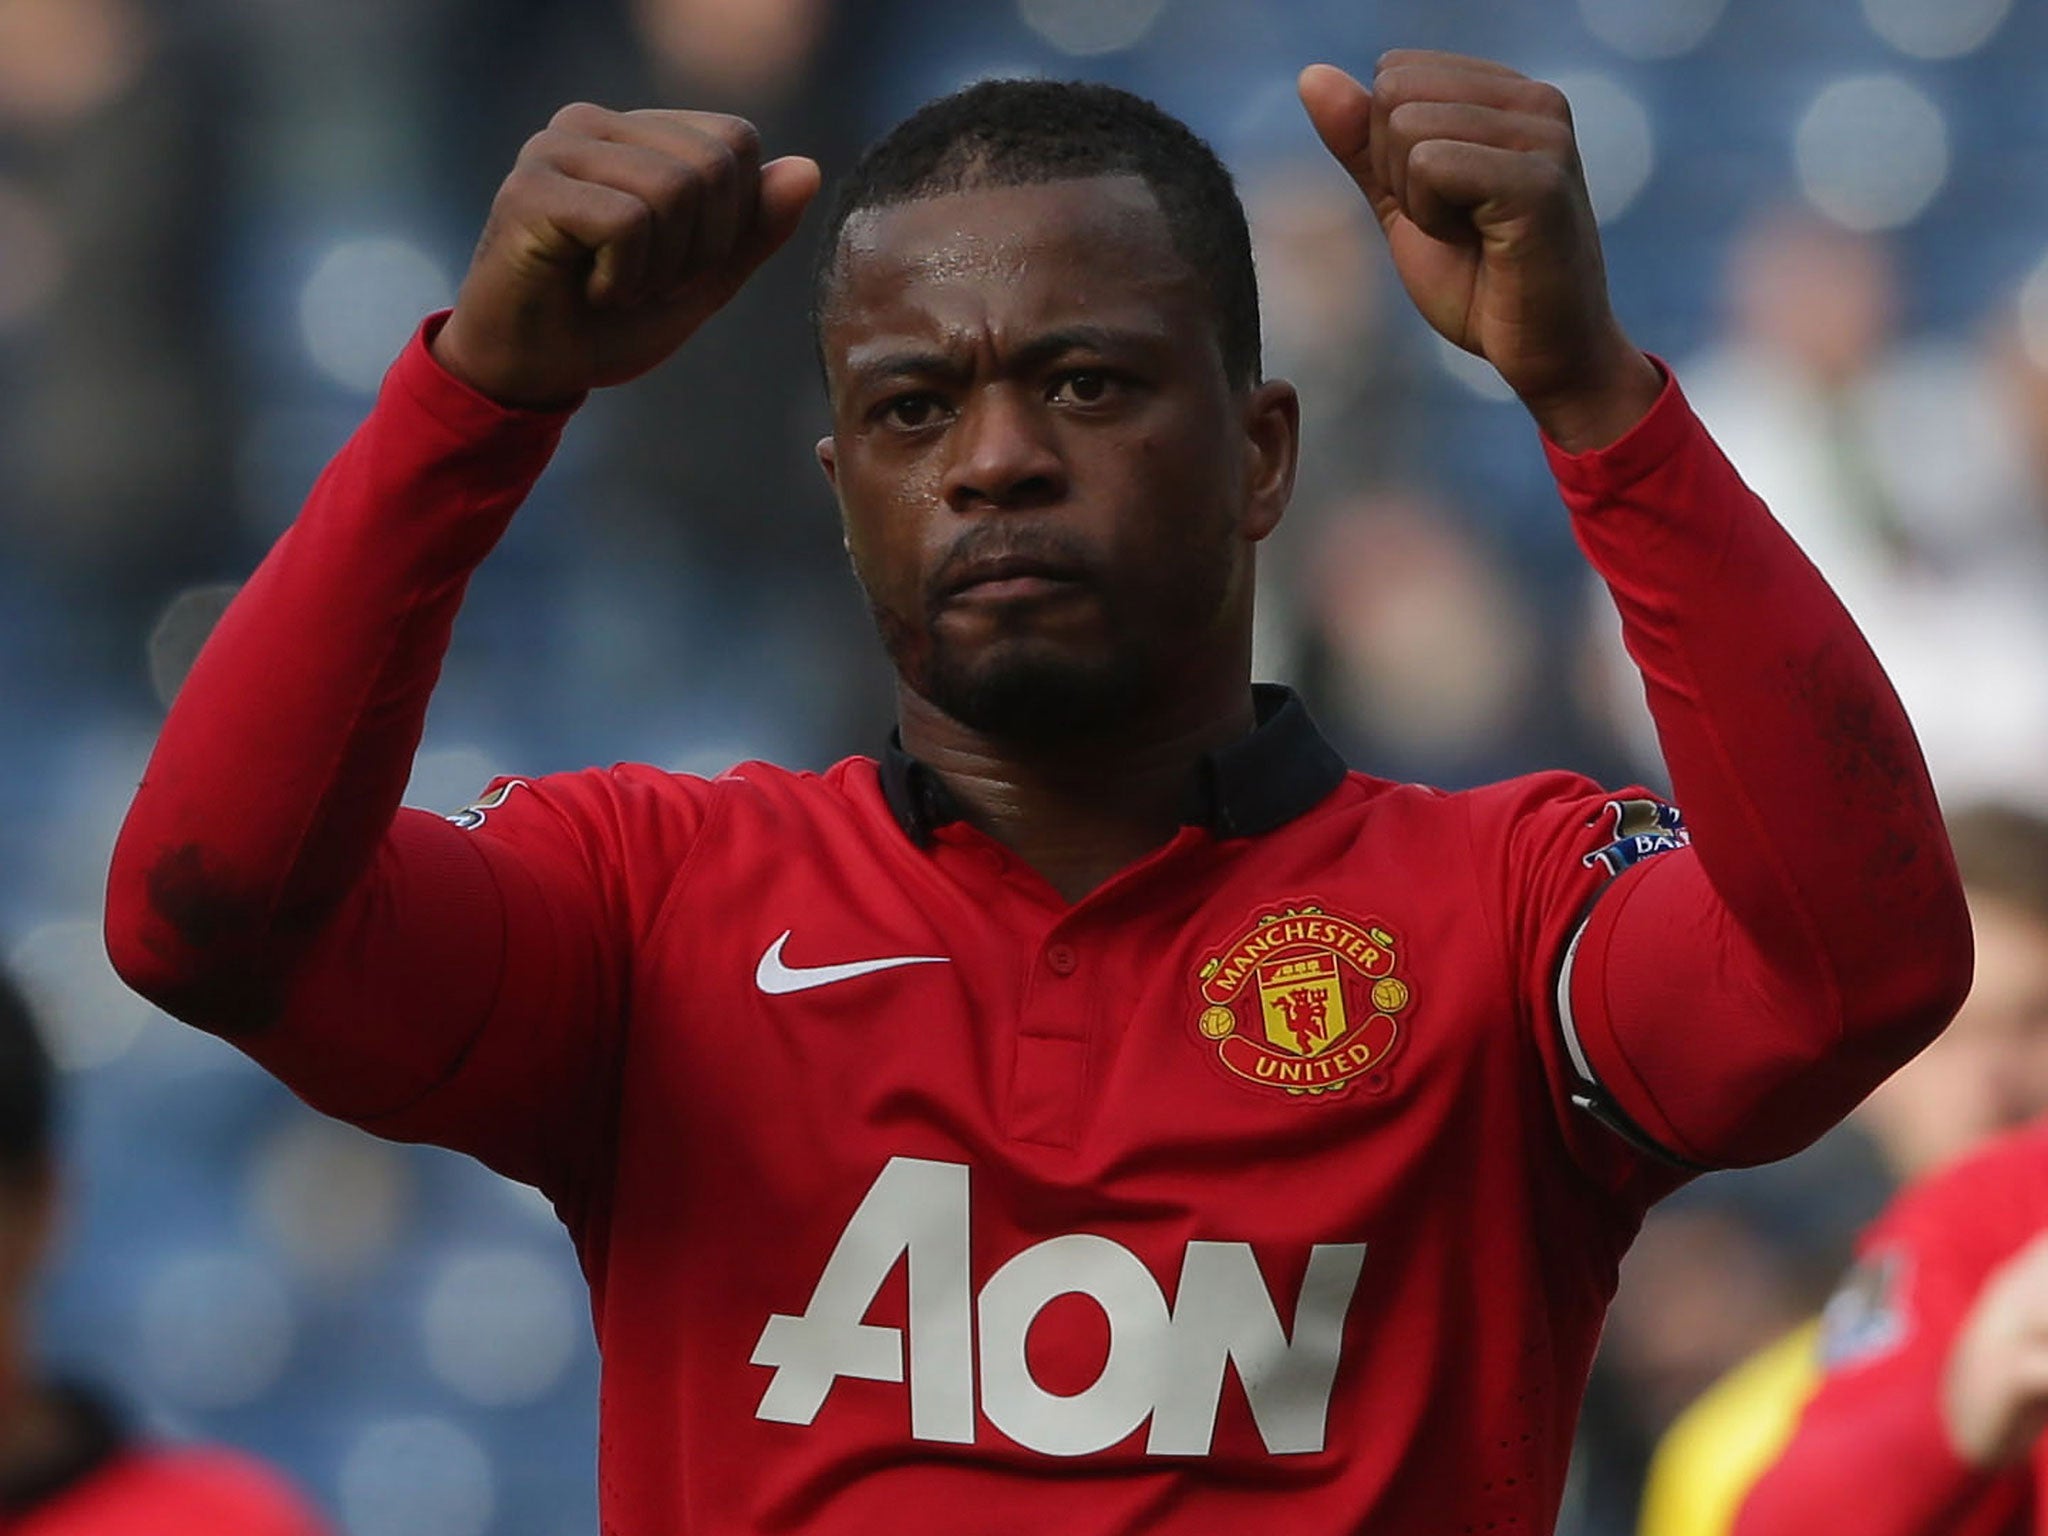 Evra during his time at United